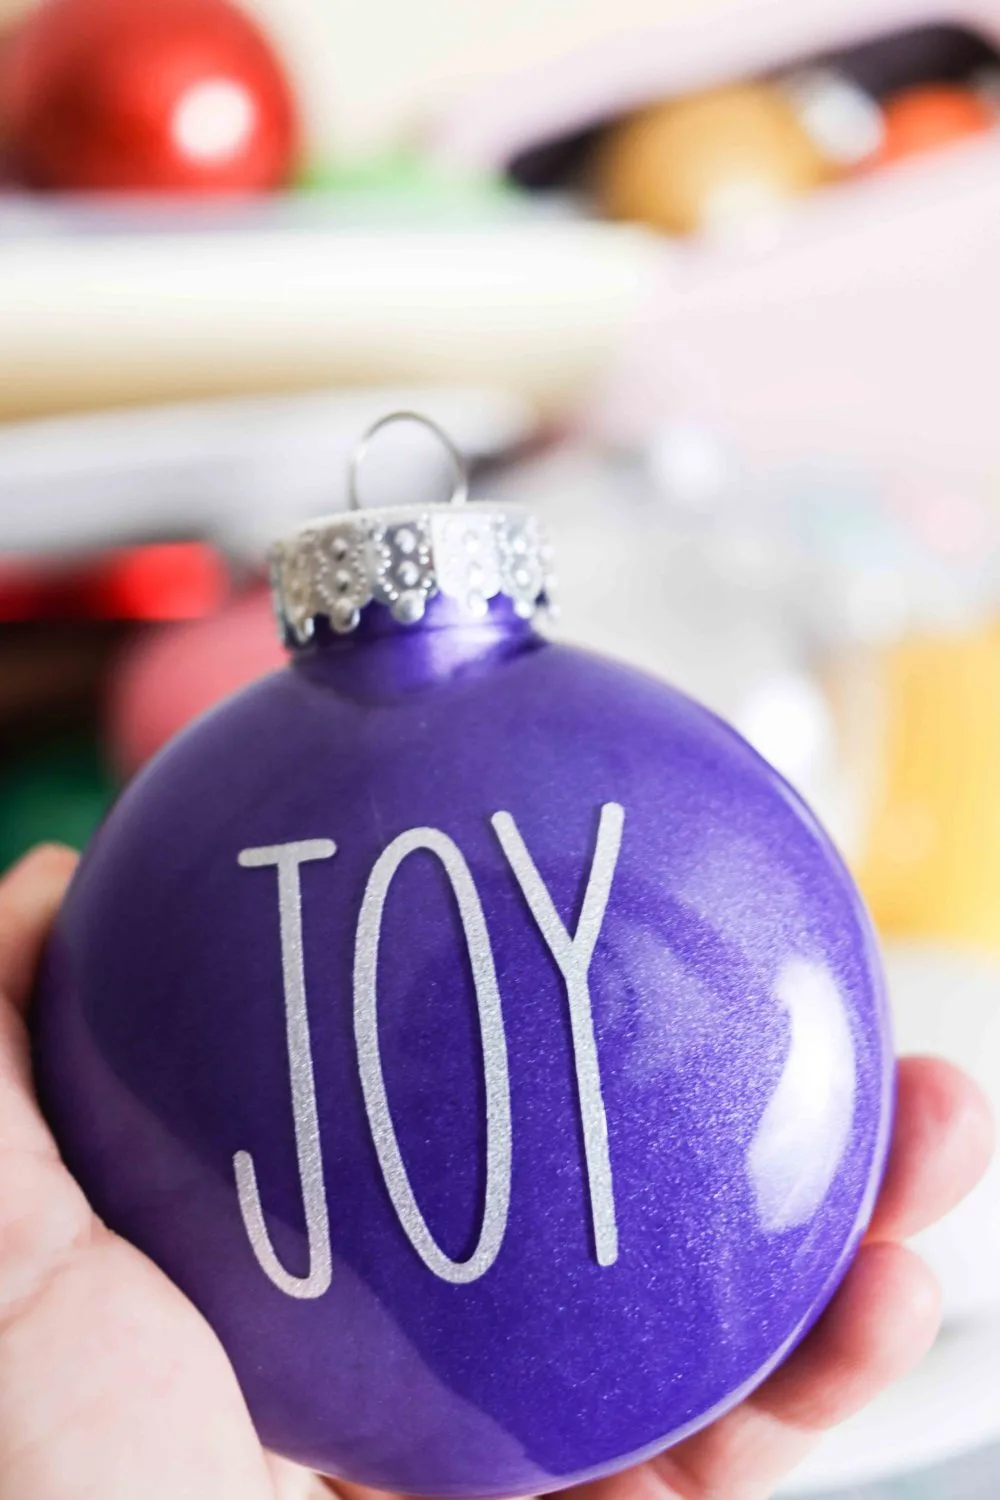 Ornament made with paint and decorated with vinyl